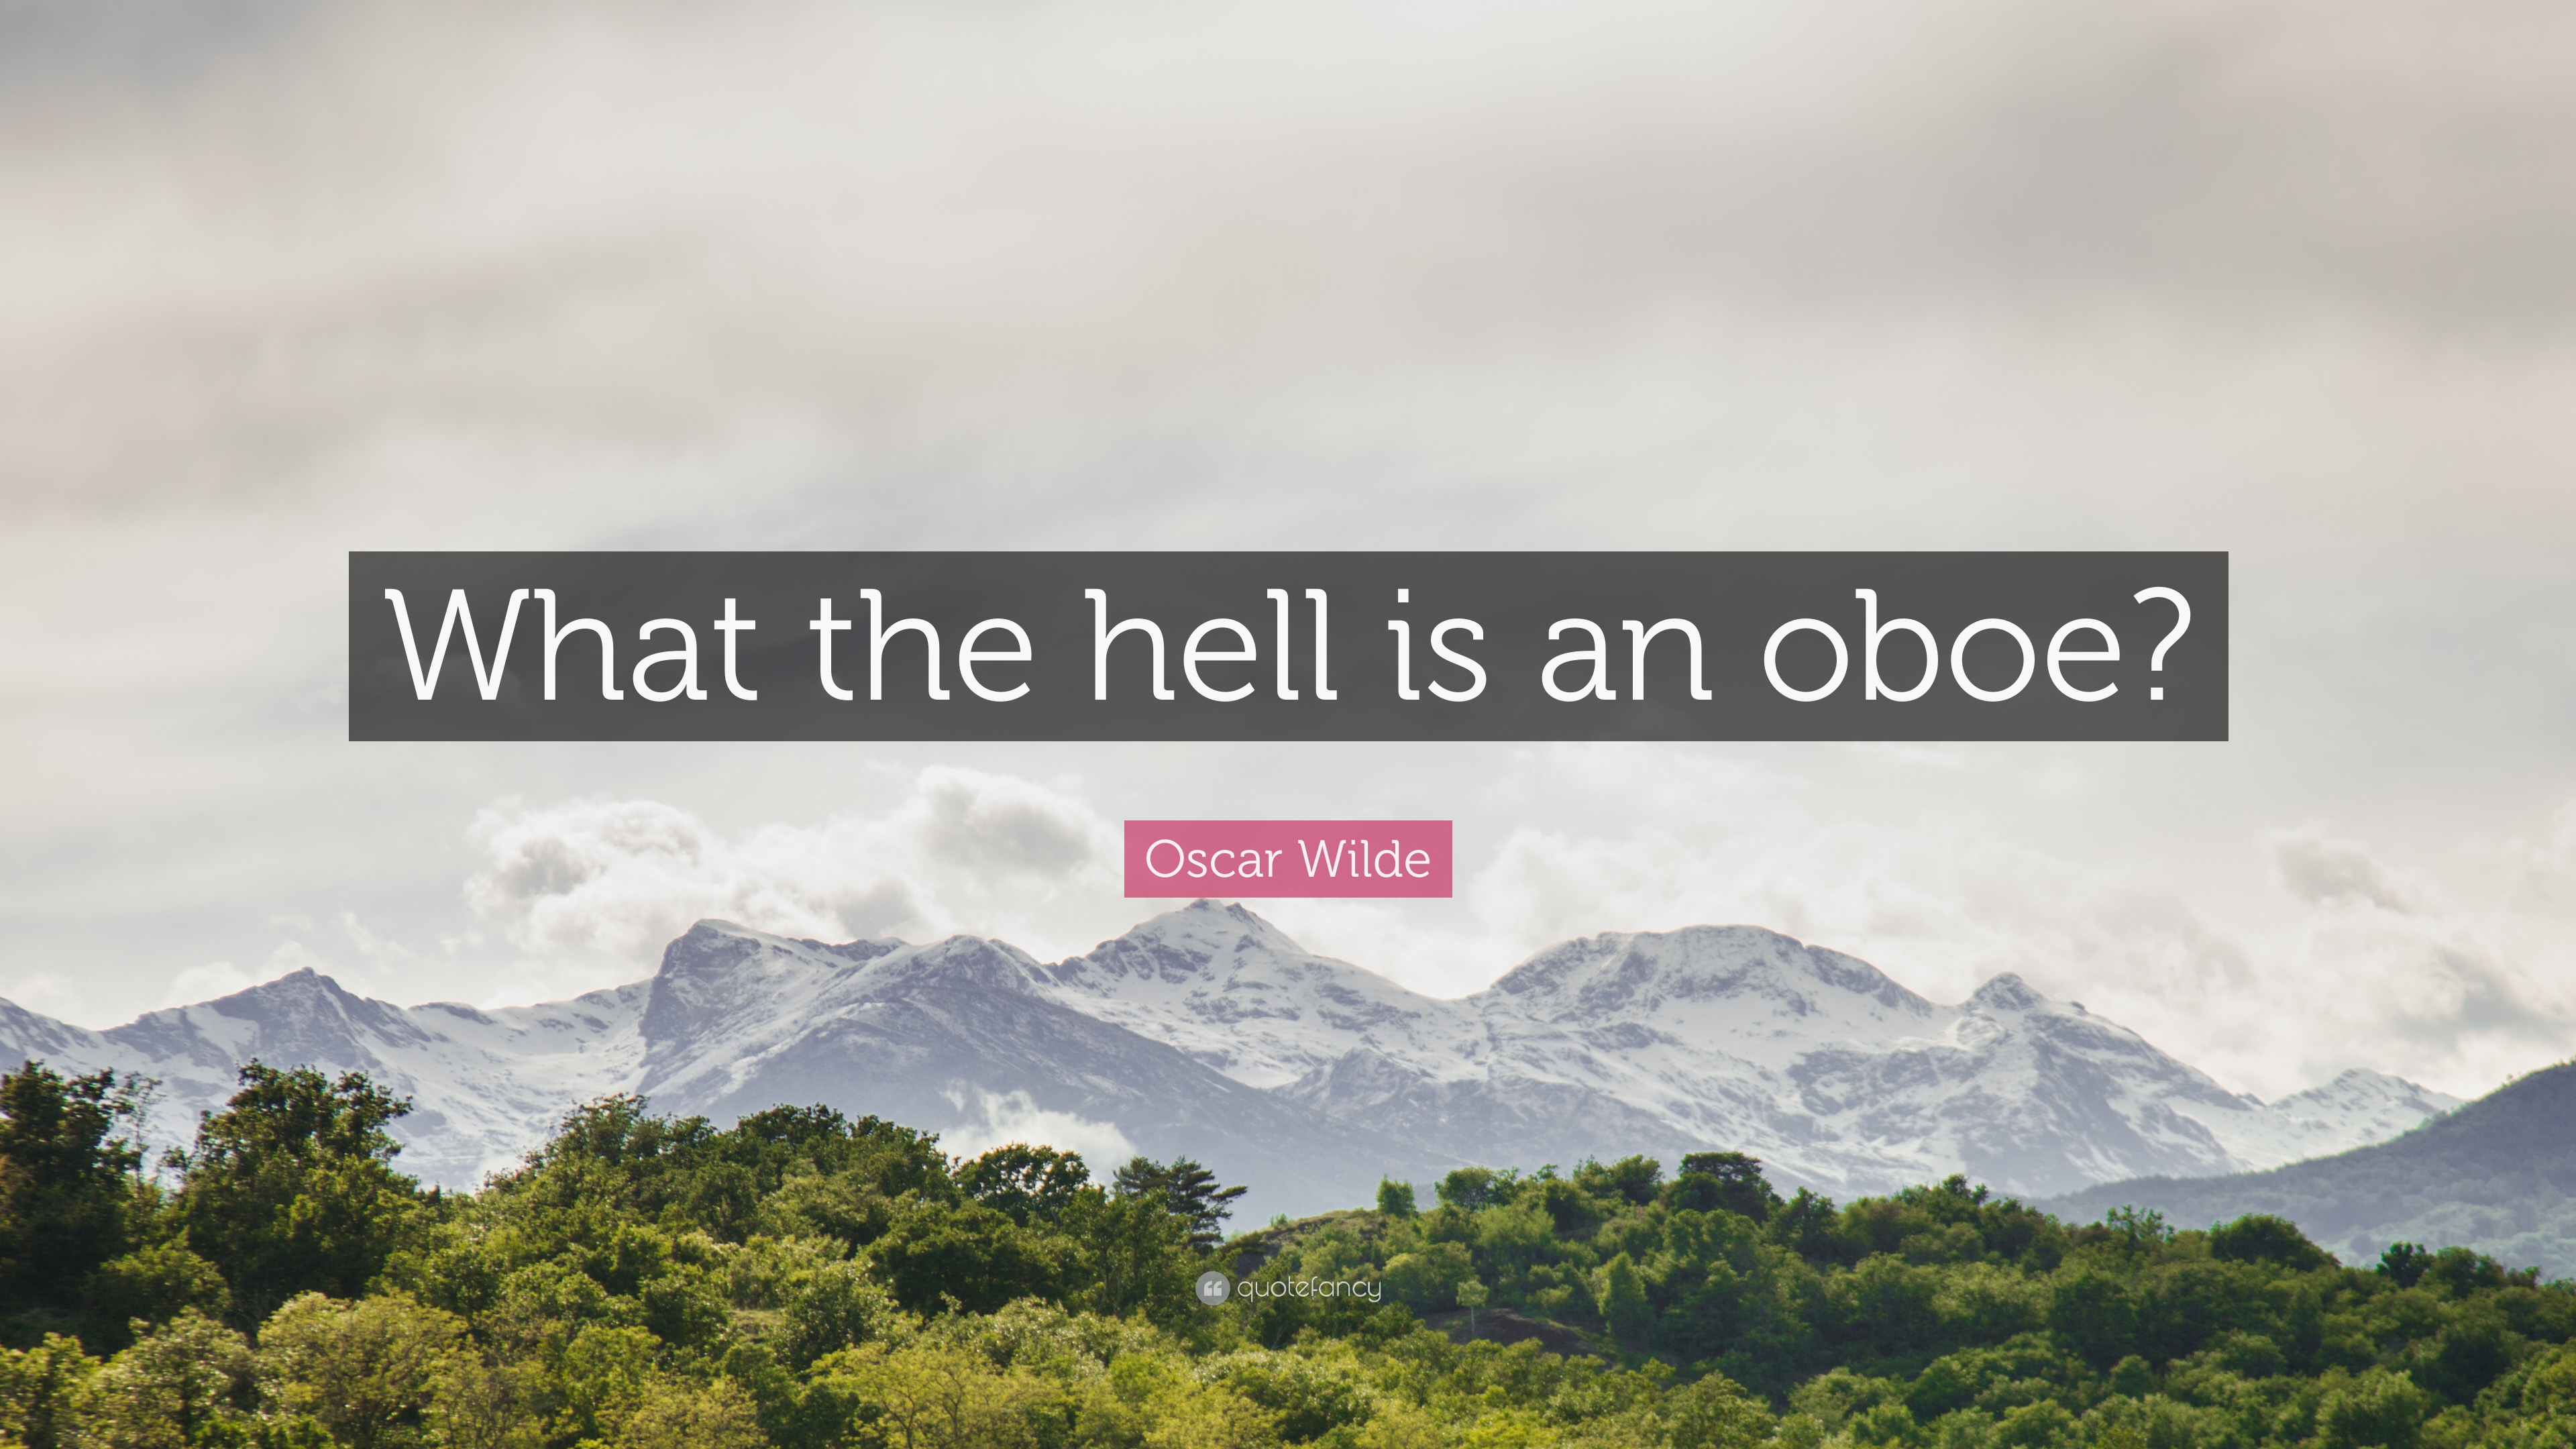 Oscar Wilde Quote: “What the hell is an oboe?” 10 wallpaper